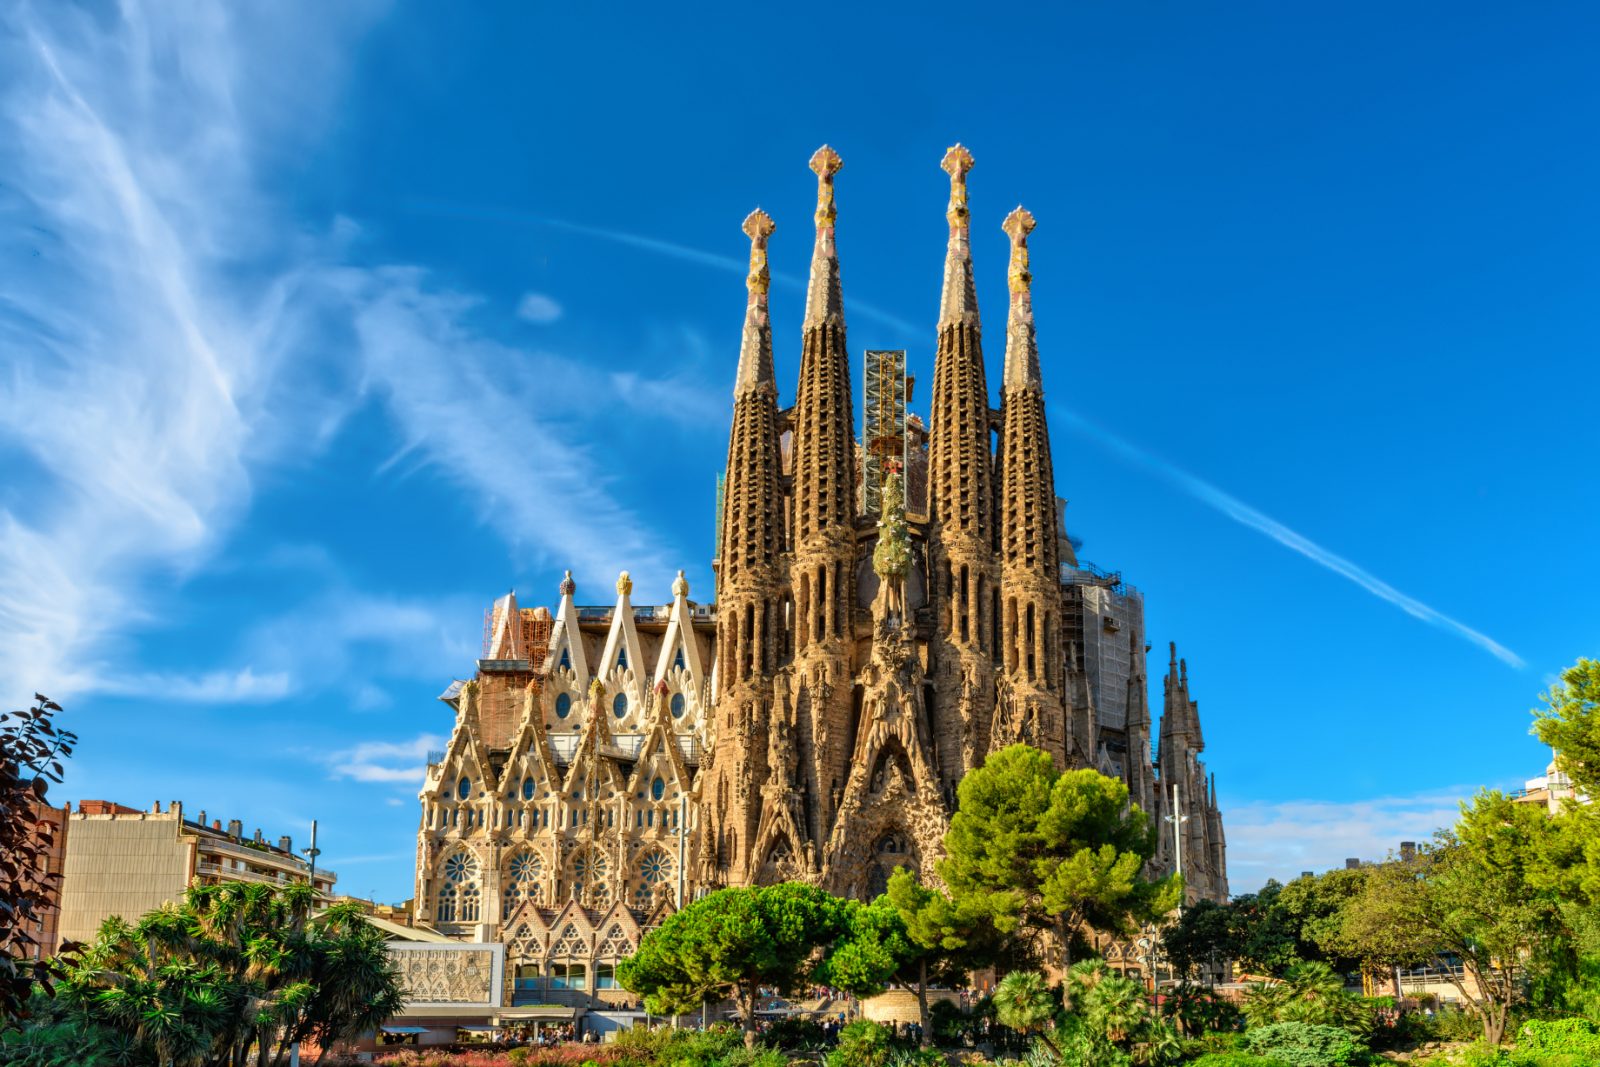 If You Can Score More Than 18 on This Famous Landmarks Quiz, You Probably Know All About the World La Sagrada Familia in Barcelona, Spain